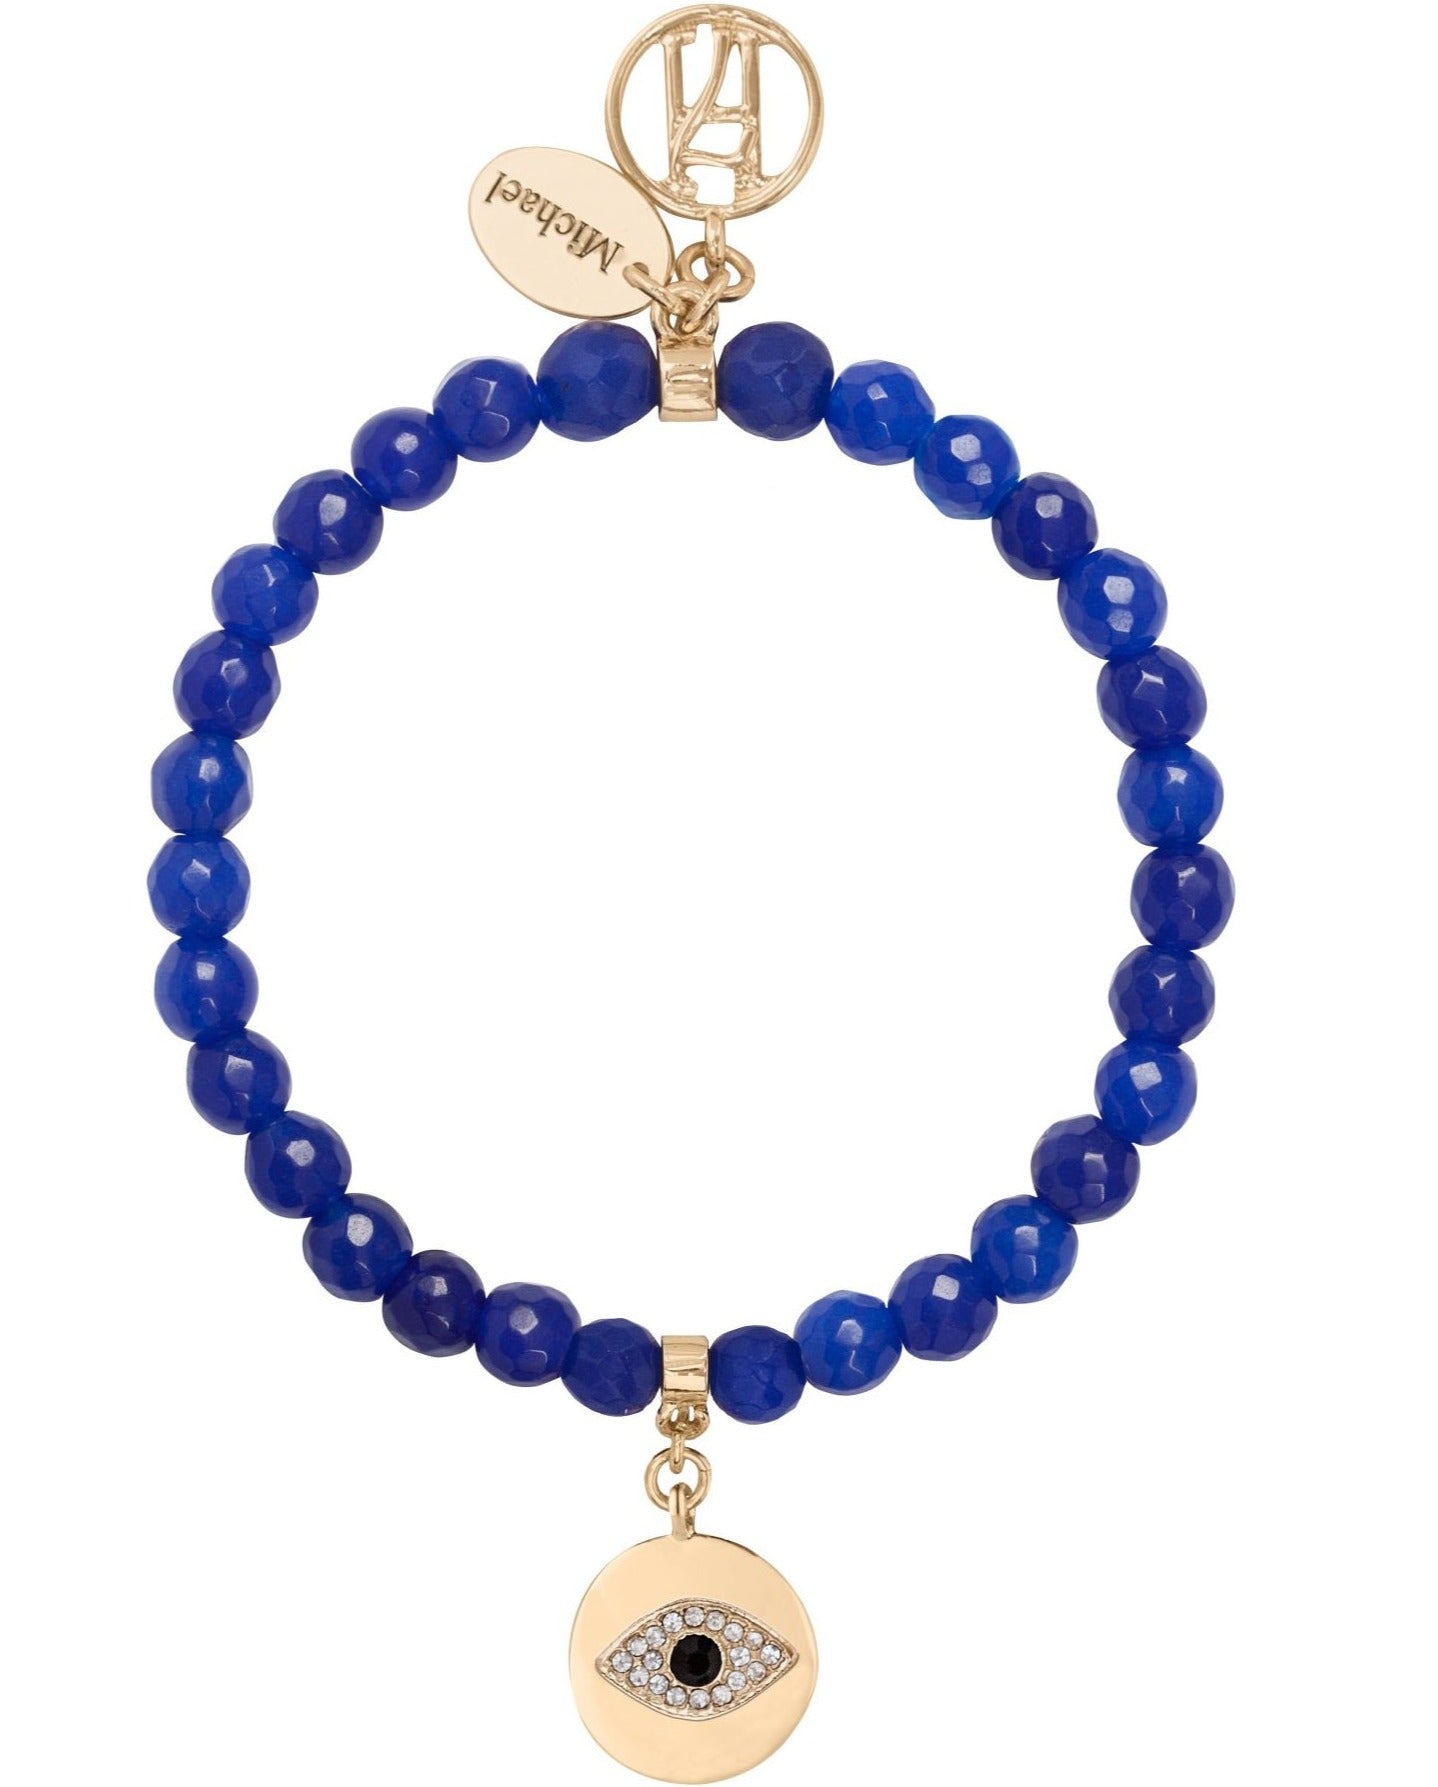 Angel Michael Blue Bracelet for Protection, Strength & Courage Third Eye Disc Charm